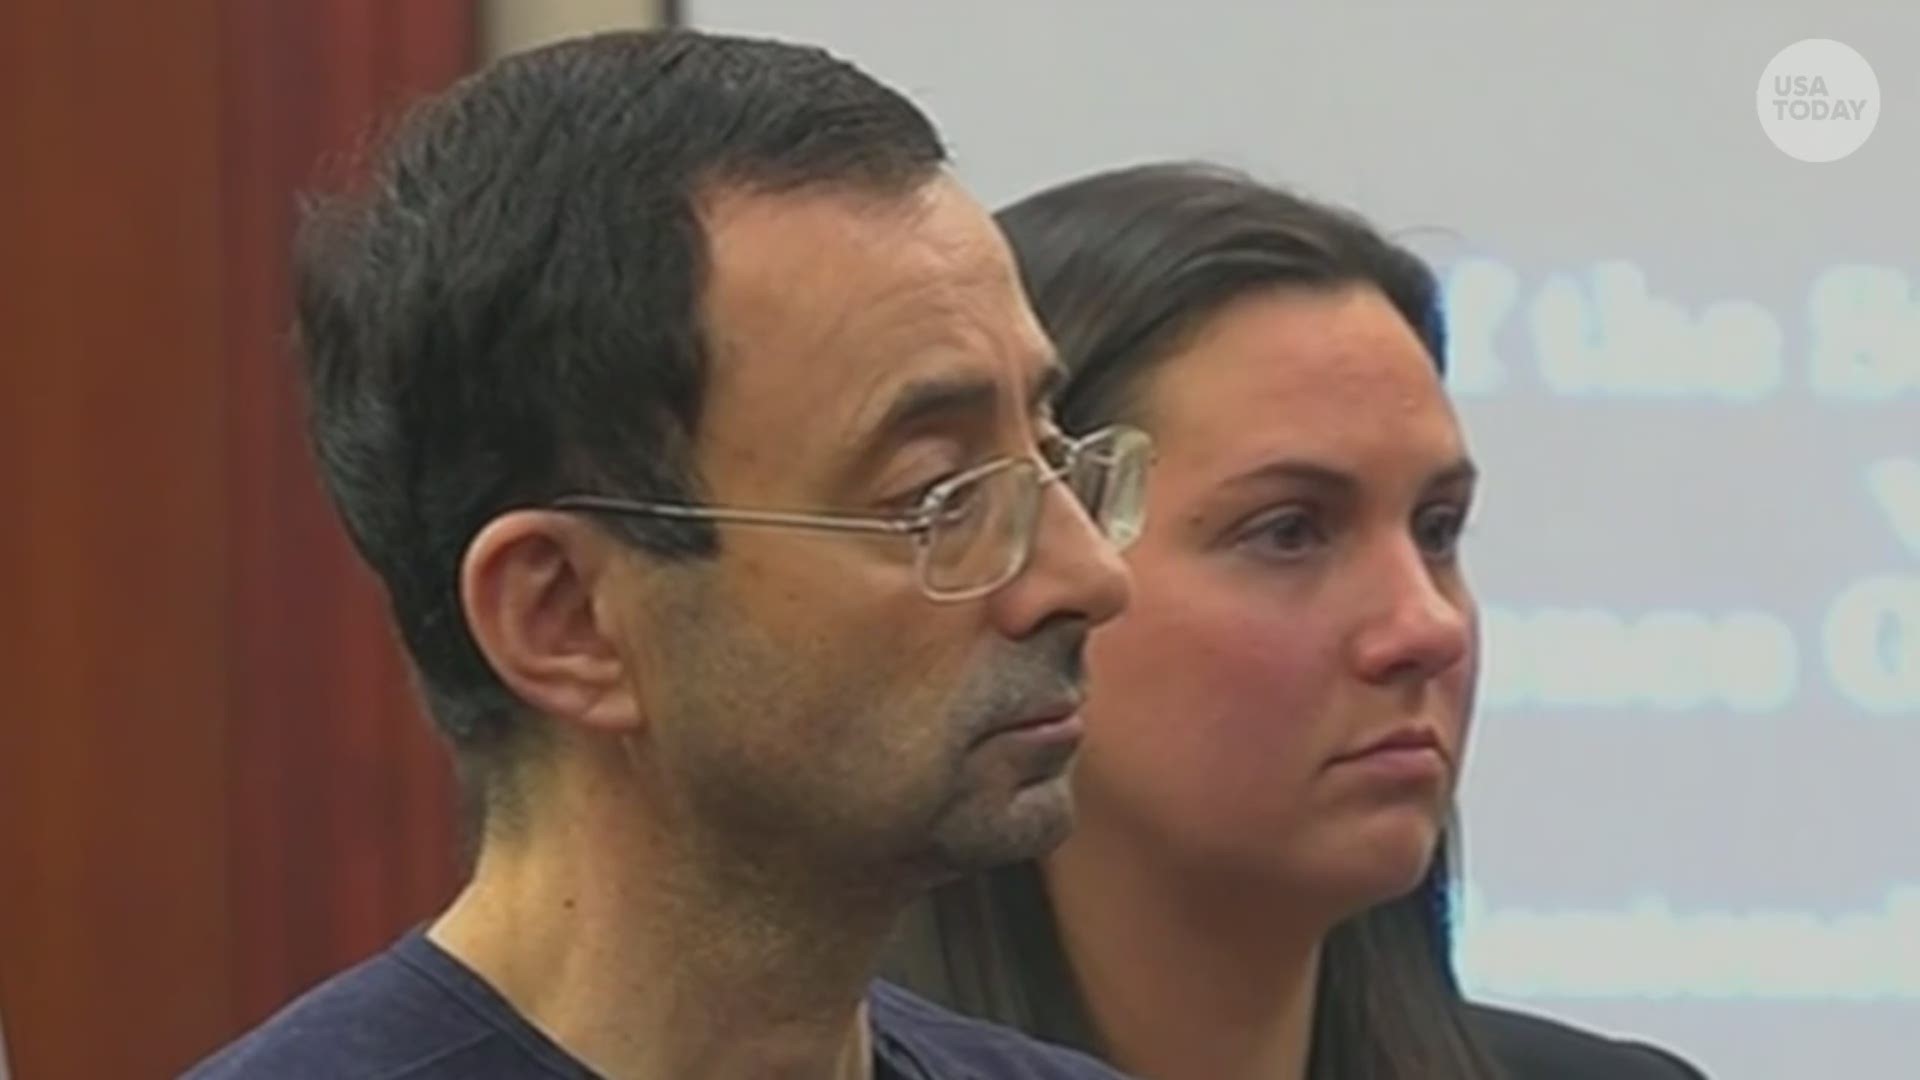 Judge Rosemarie Aquilina sentenced Larry Nassar to 40 to 175 years in prison after pleading guilty to 10 charges of sexual assault.